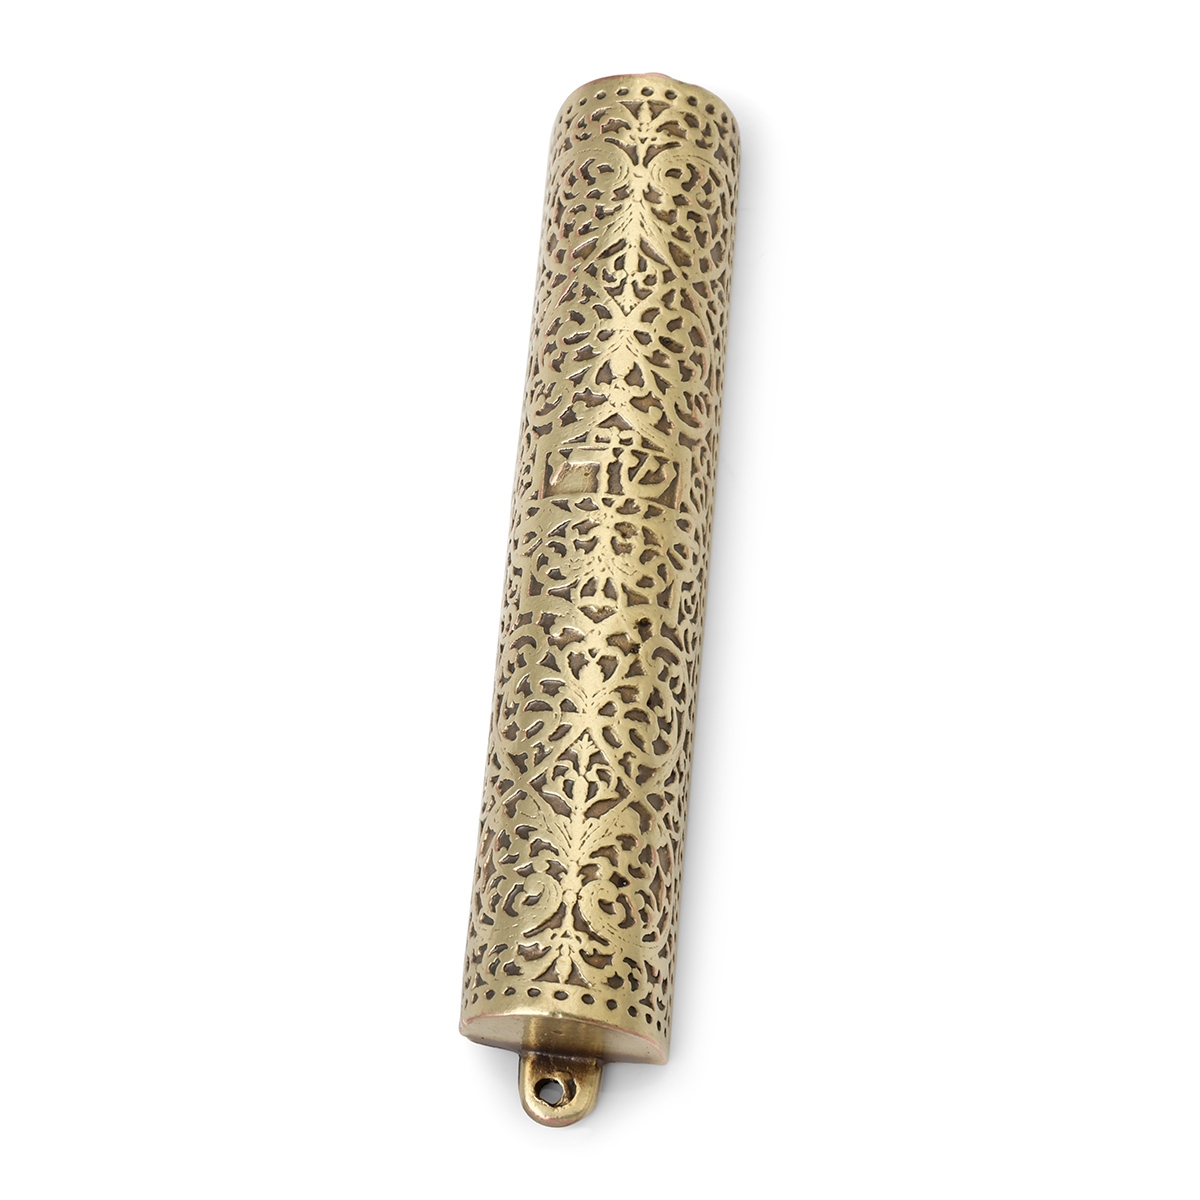  Blackened Brass Mezuzah Case, 17th Century Germany - Israel Museum Collection - 1